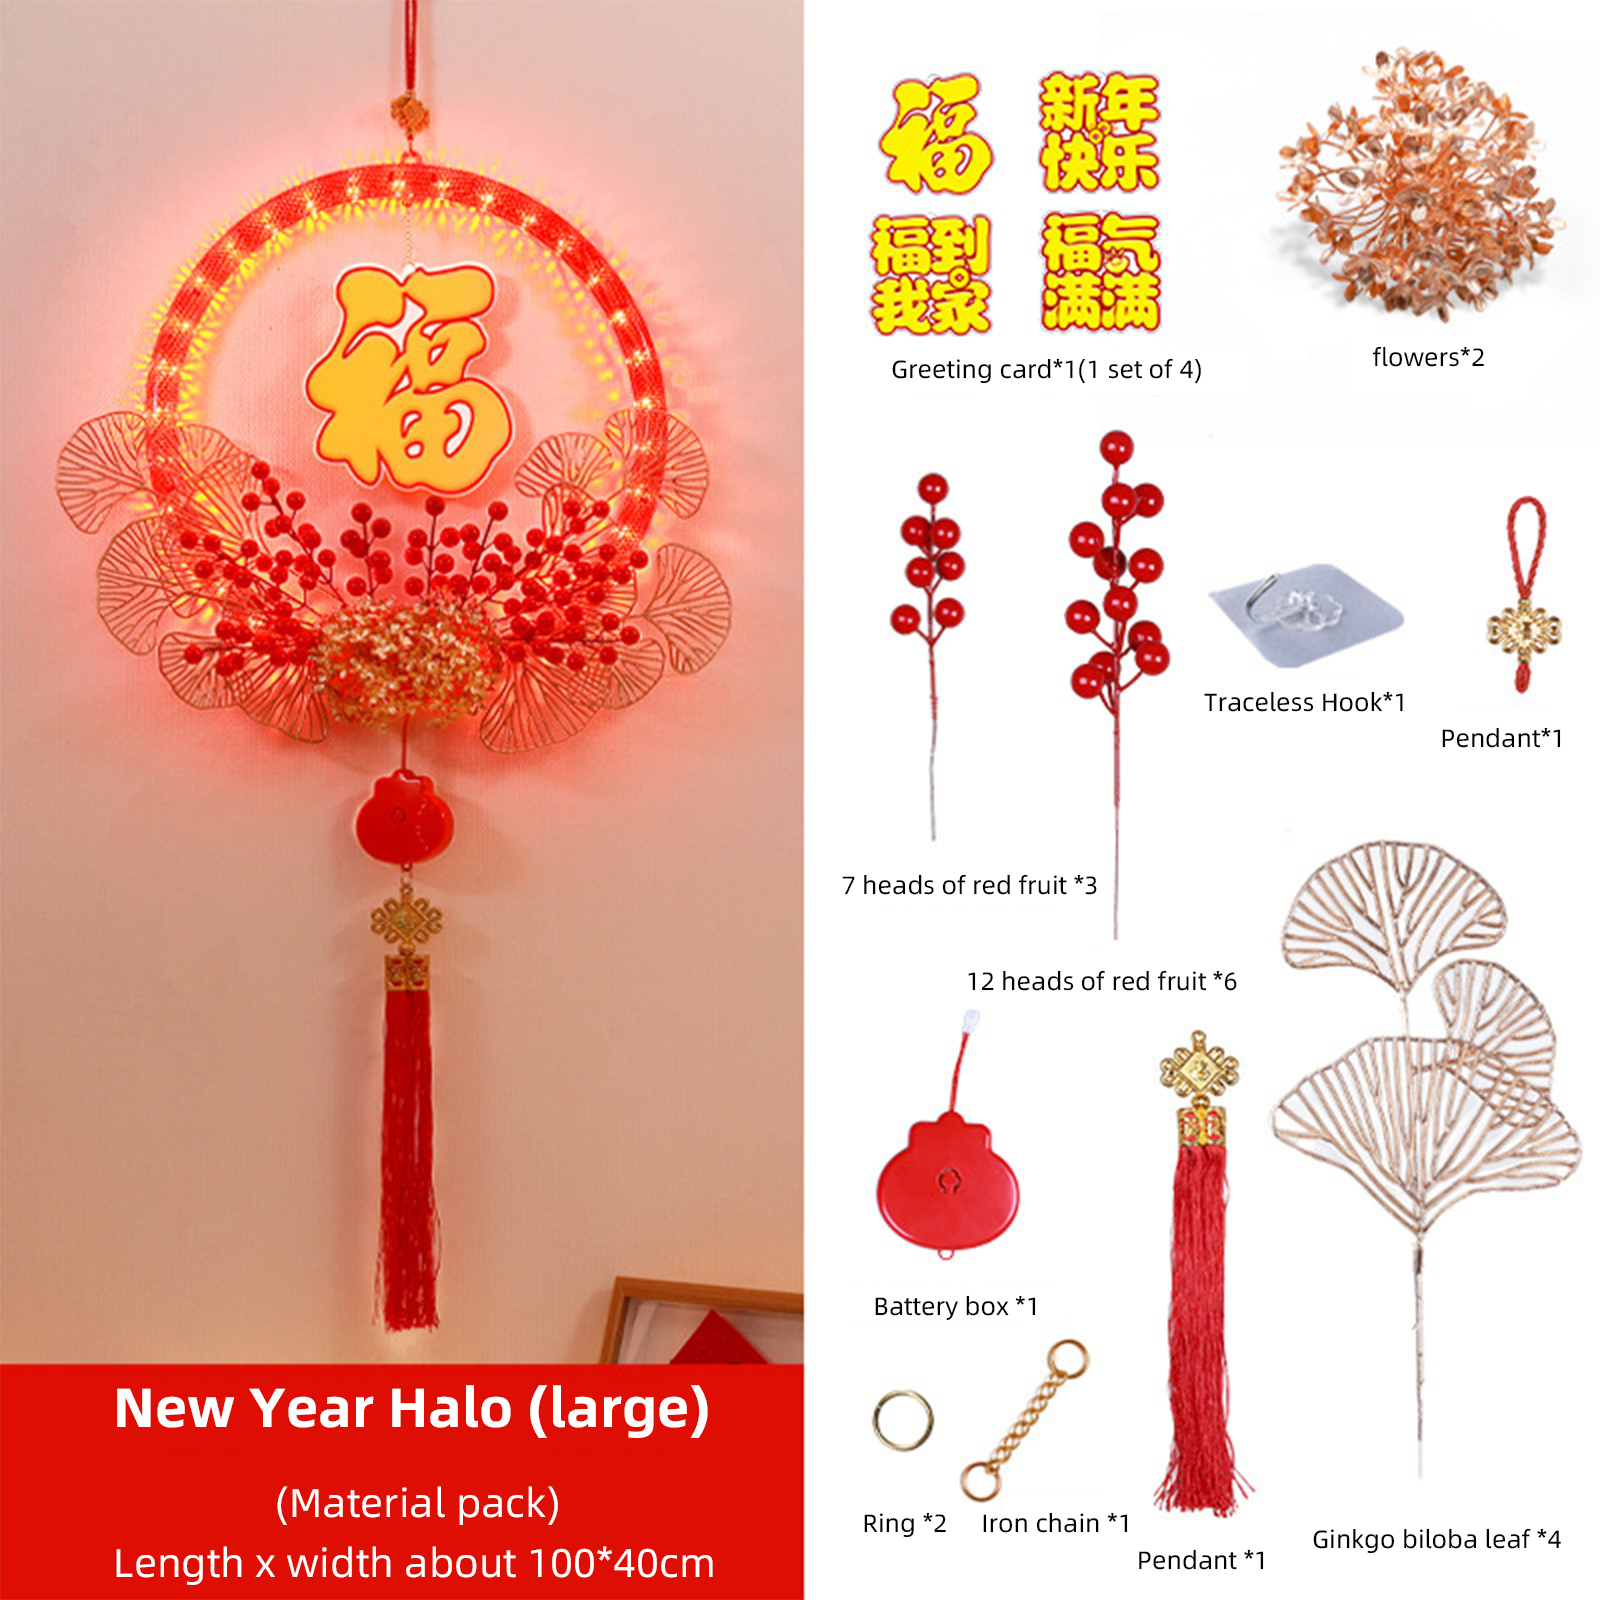 Chinese Hanging Decor Lunar New Year With Light Chinese Spring Festival Ornament For Home Wall Door Window Spring Festival Decorations